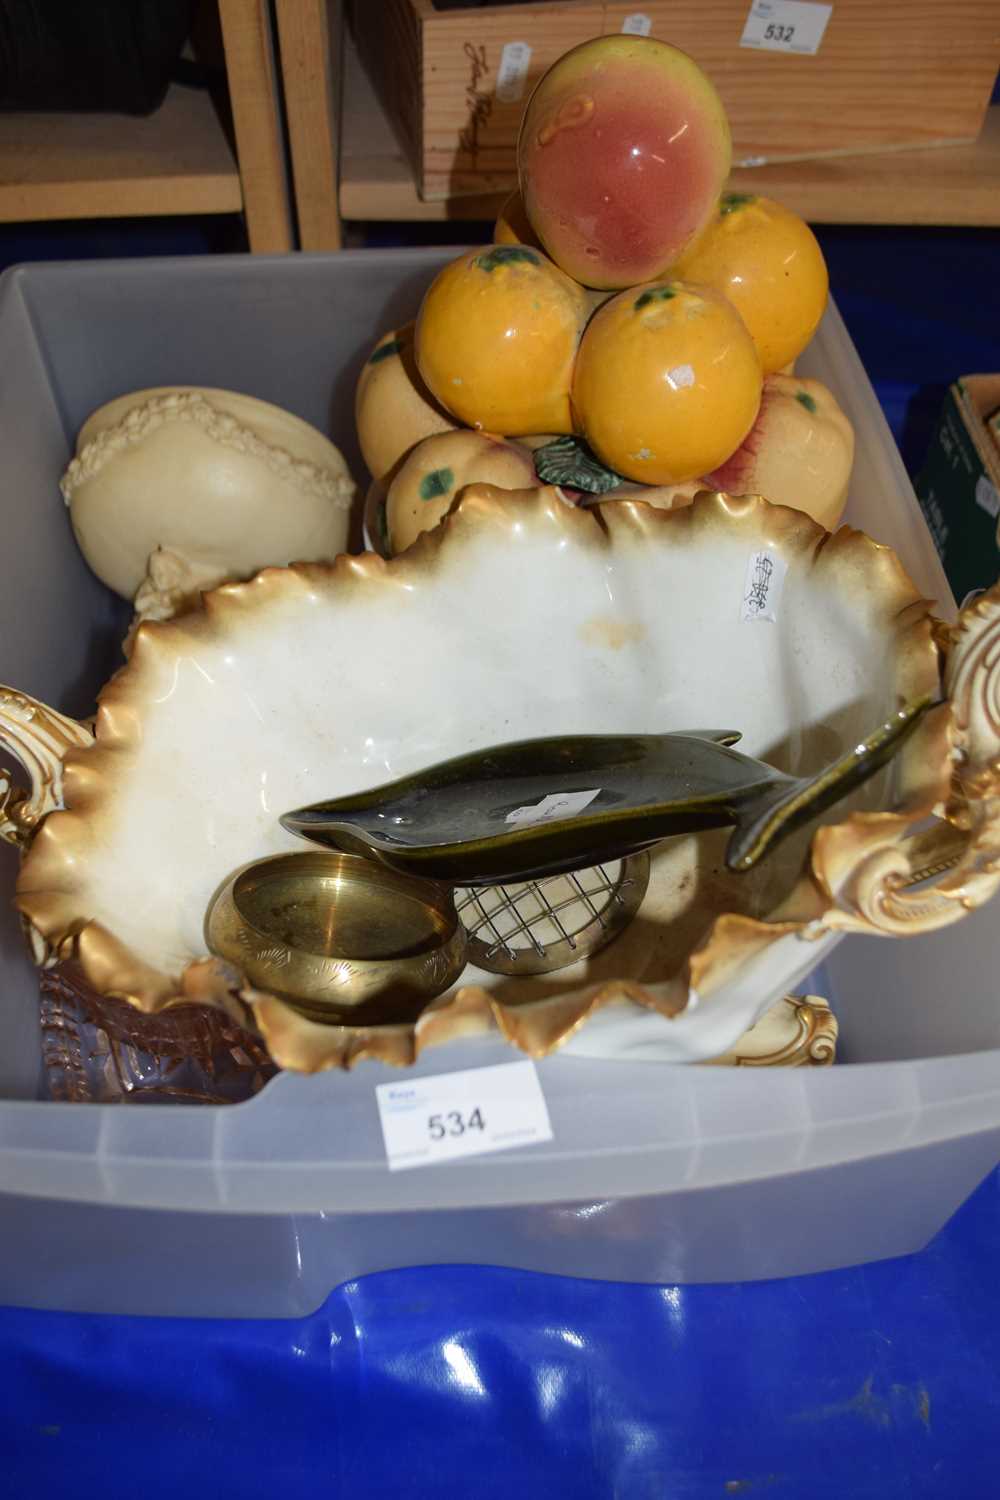 Mixed Lot: Porcelain model fruit, a Moore Bros centre piece (cracked), peach glass dressing table